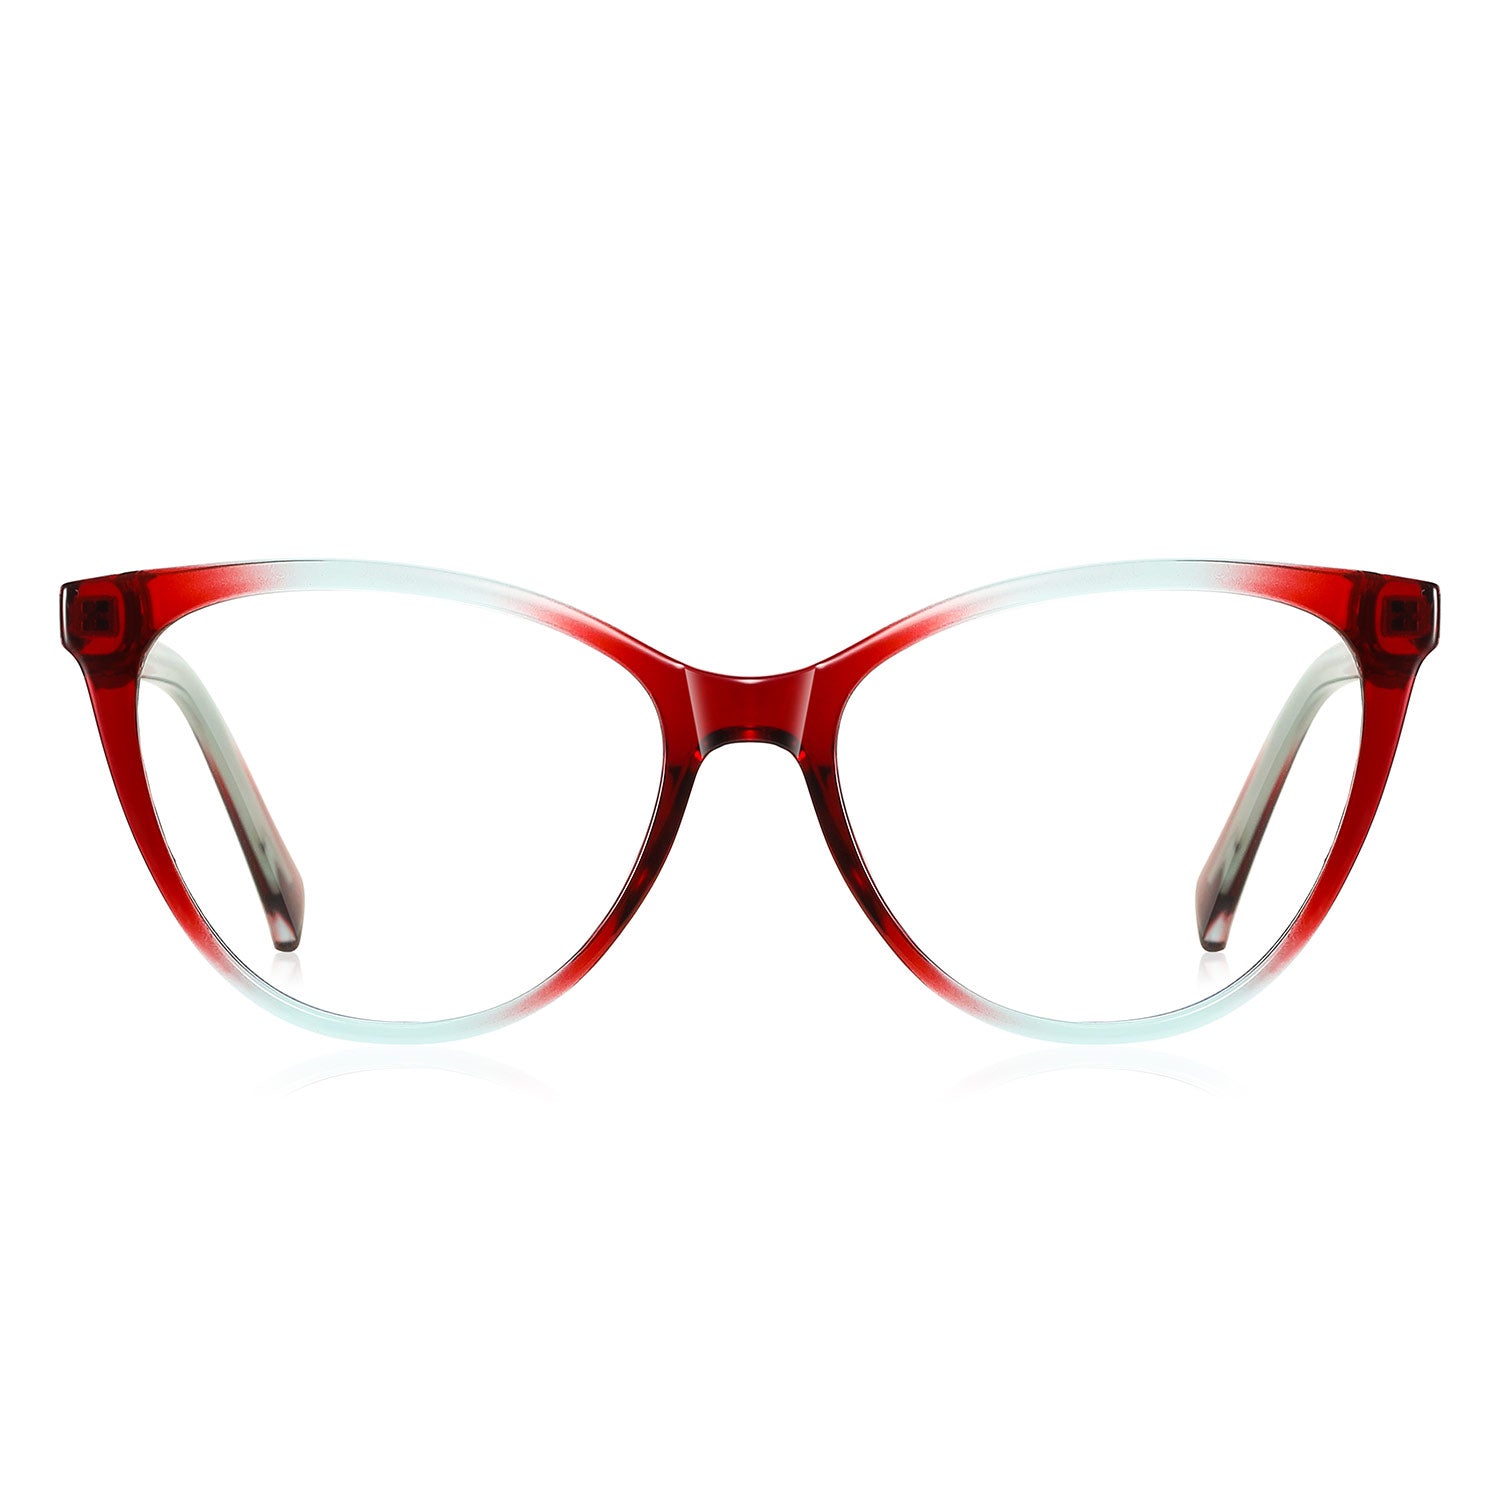 Bace | Square/Red/TR90 - Eyeglasses | ELKLOOK